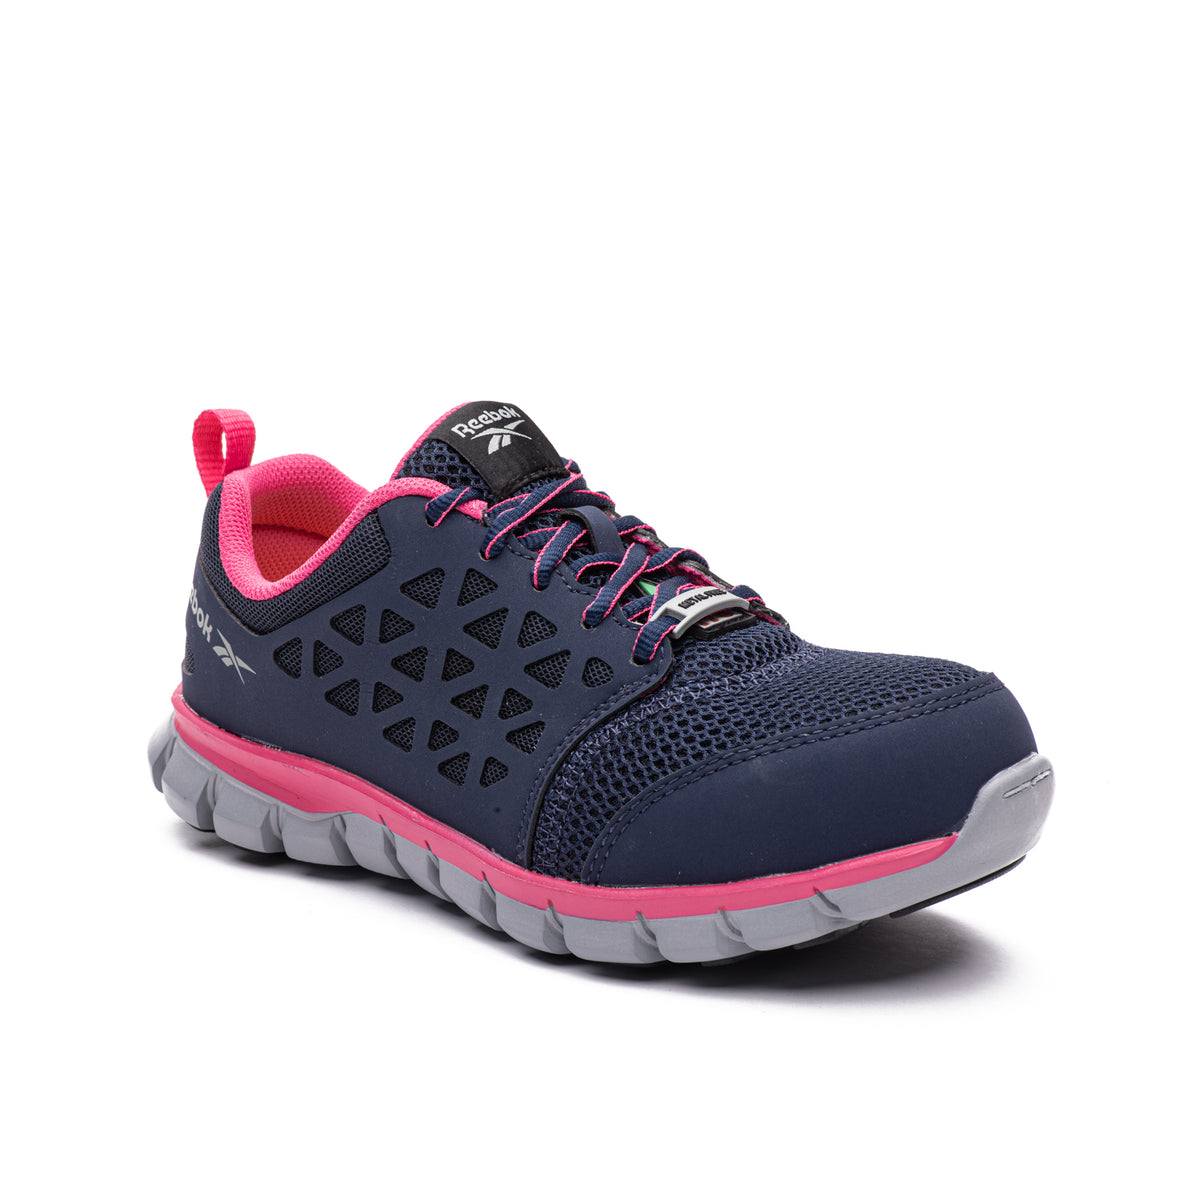 Sublite Cushion Work Women's Reebok safety shoes IB046 – Mister Safety ...